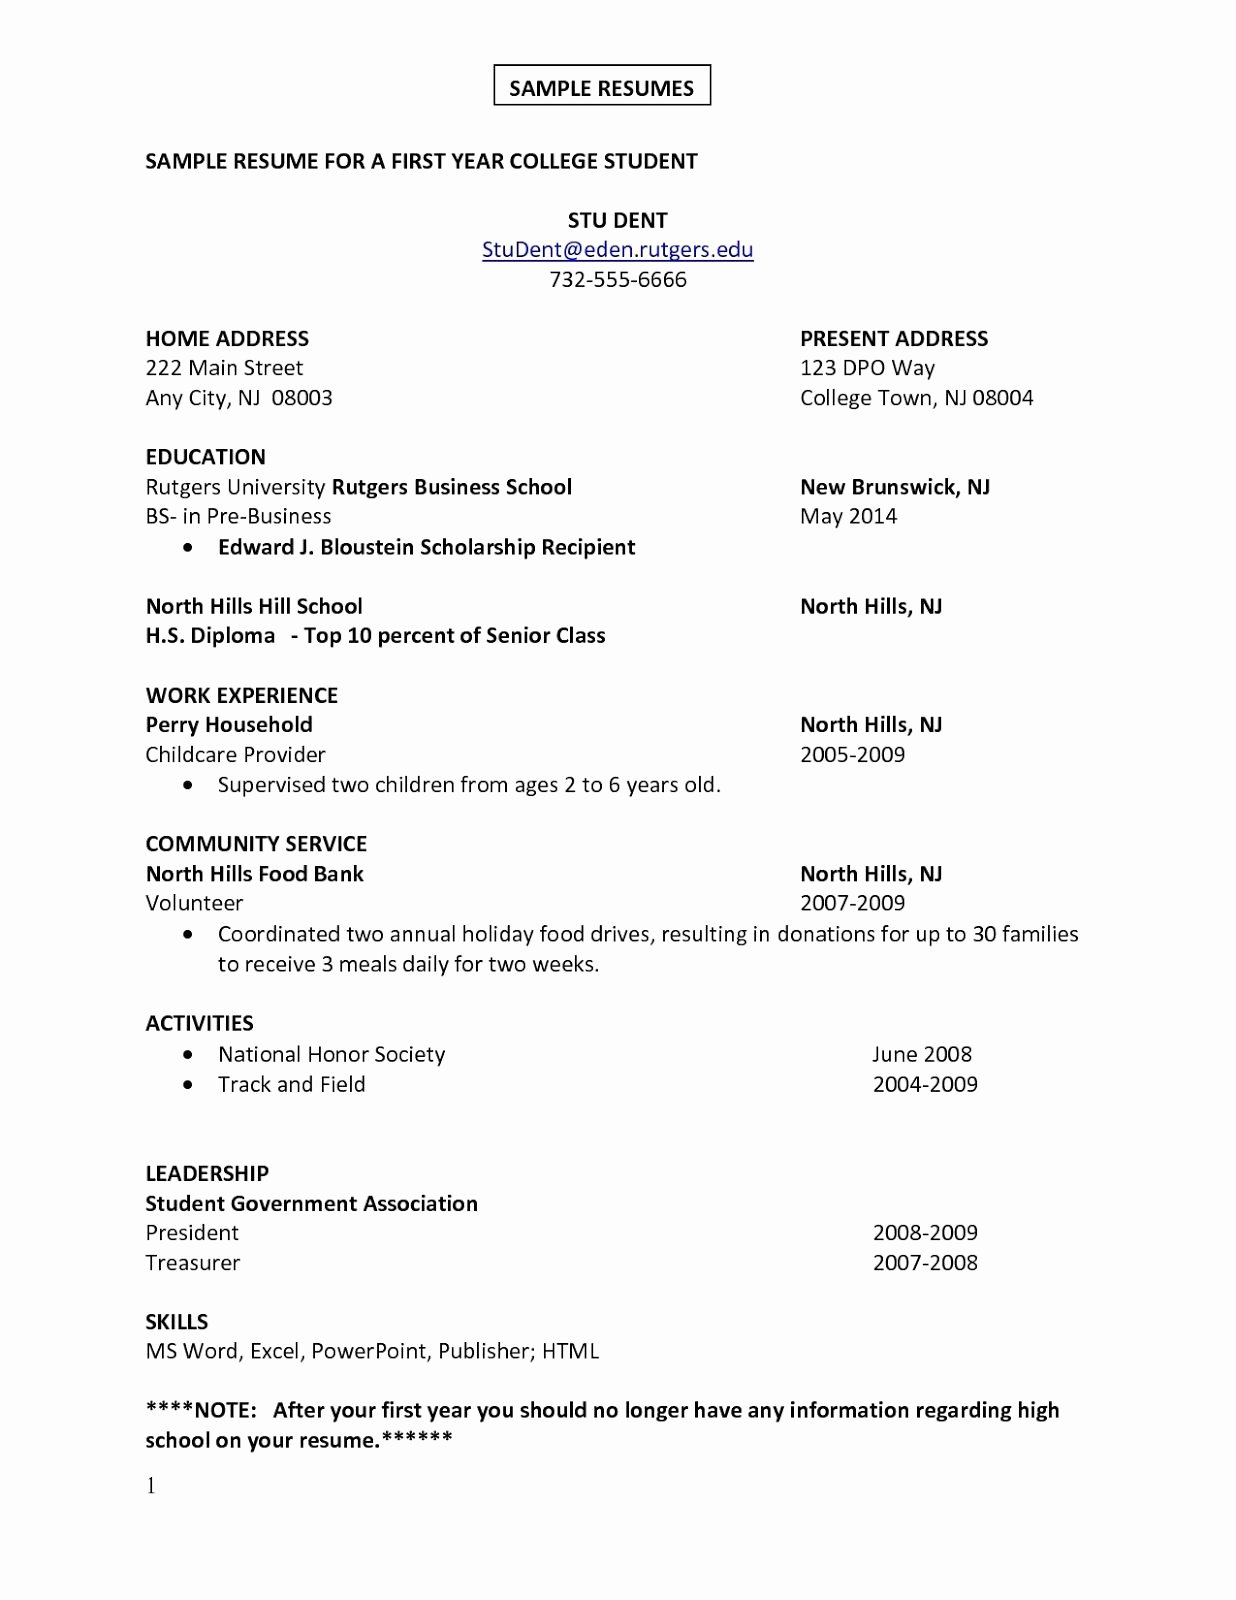 Resume for First Job Examples Inspirational First Job Sample Resume Sample Resumes